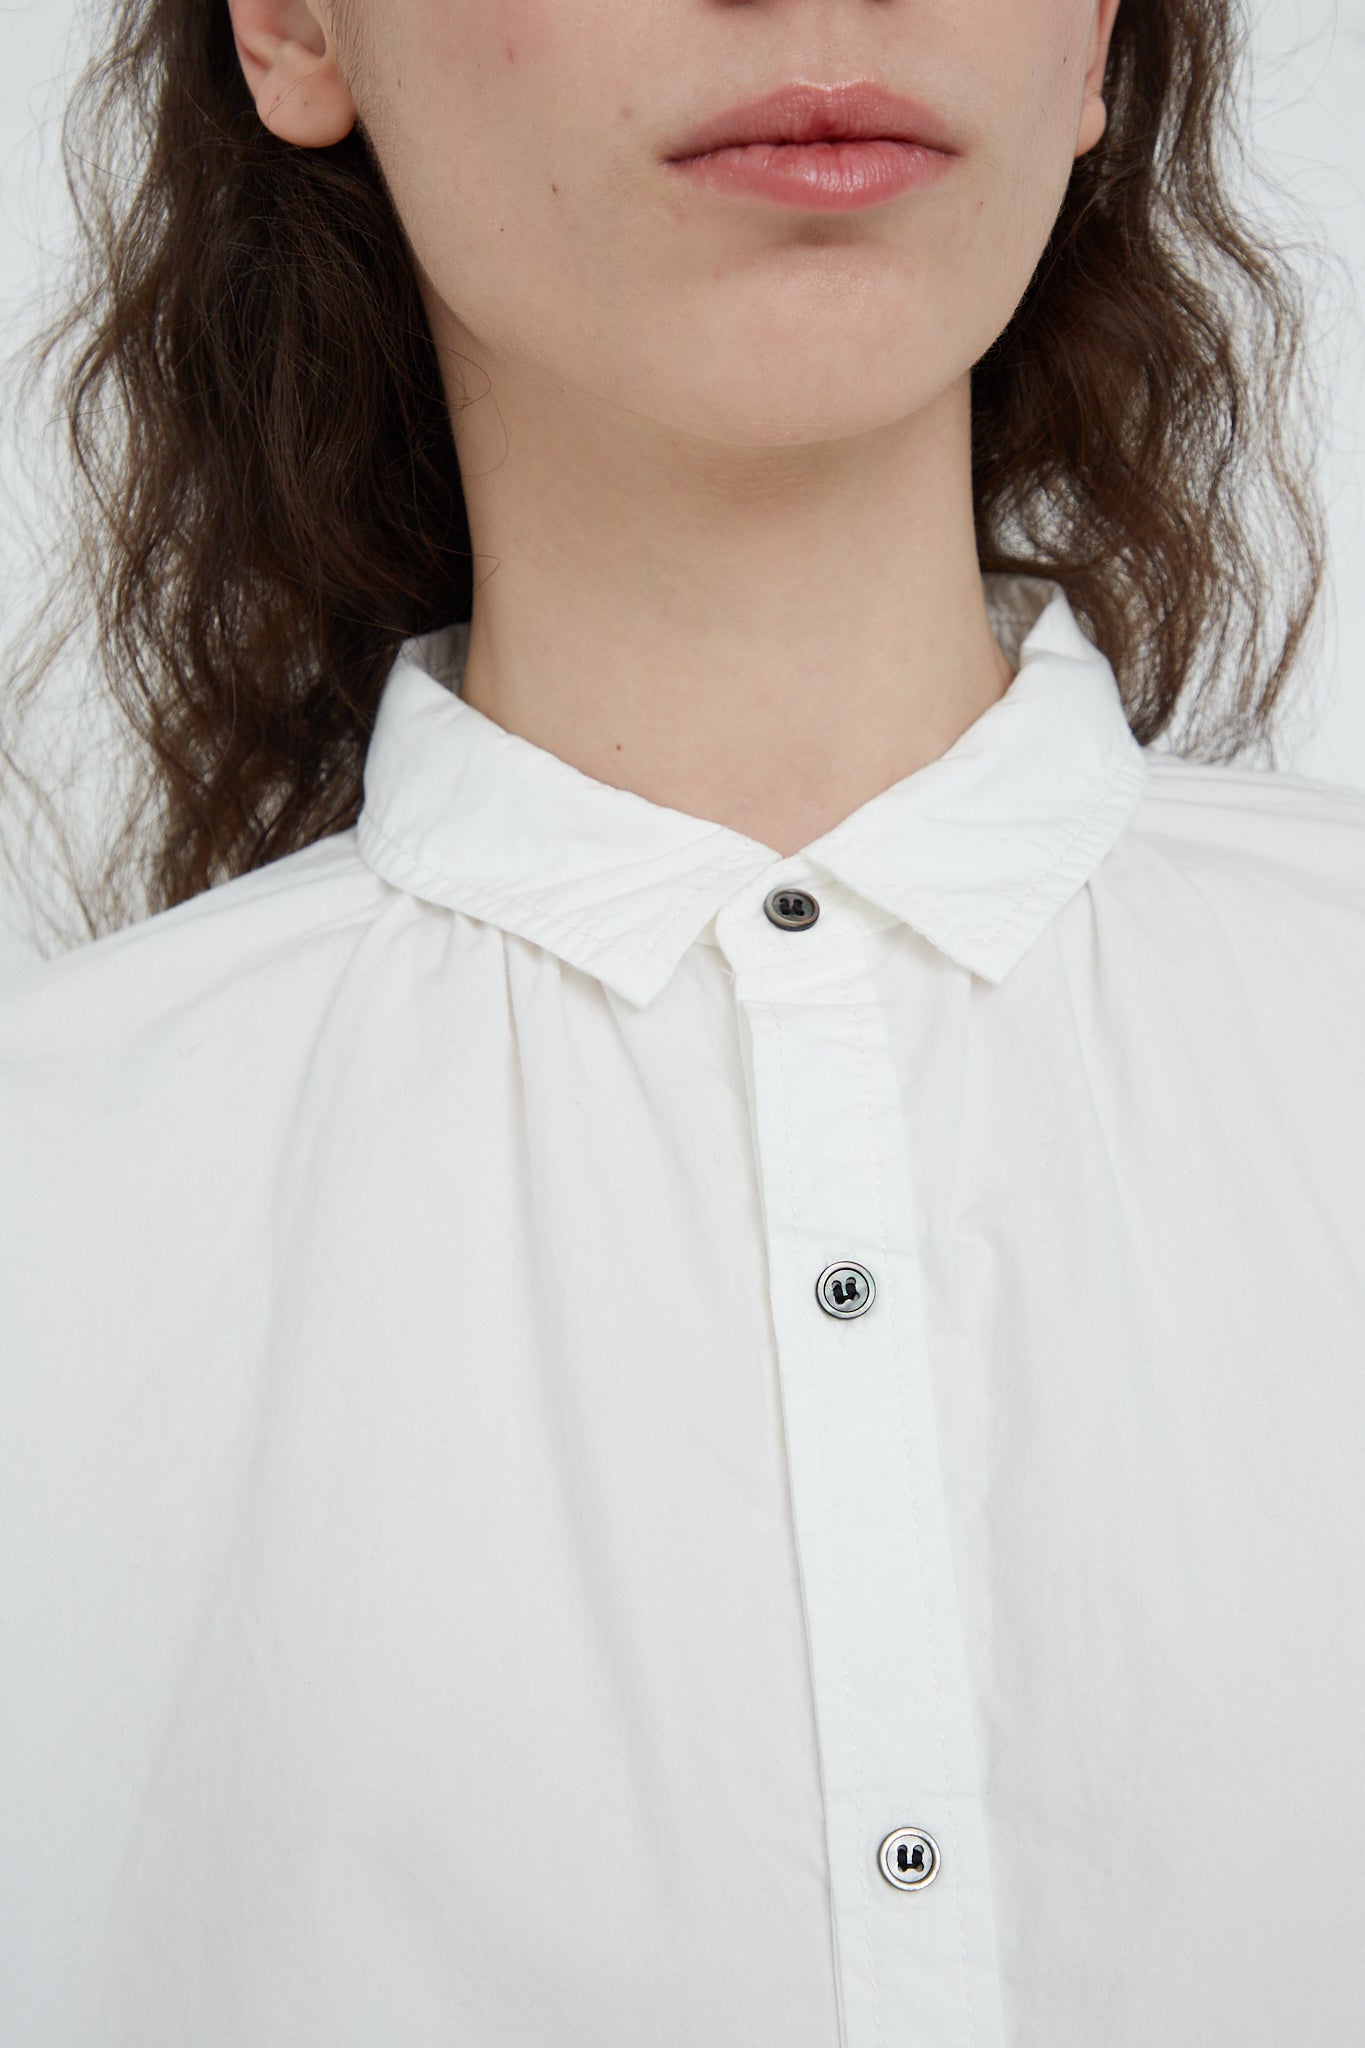 A woman wearing an Ichi Antiquités Woven Cotton Oumisarashi Shirt in White with buttons. Up close view.